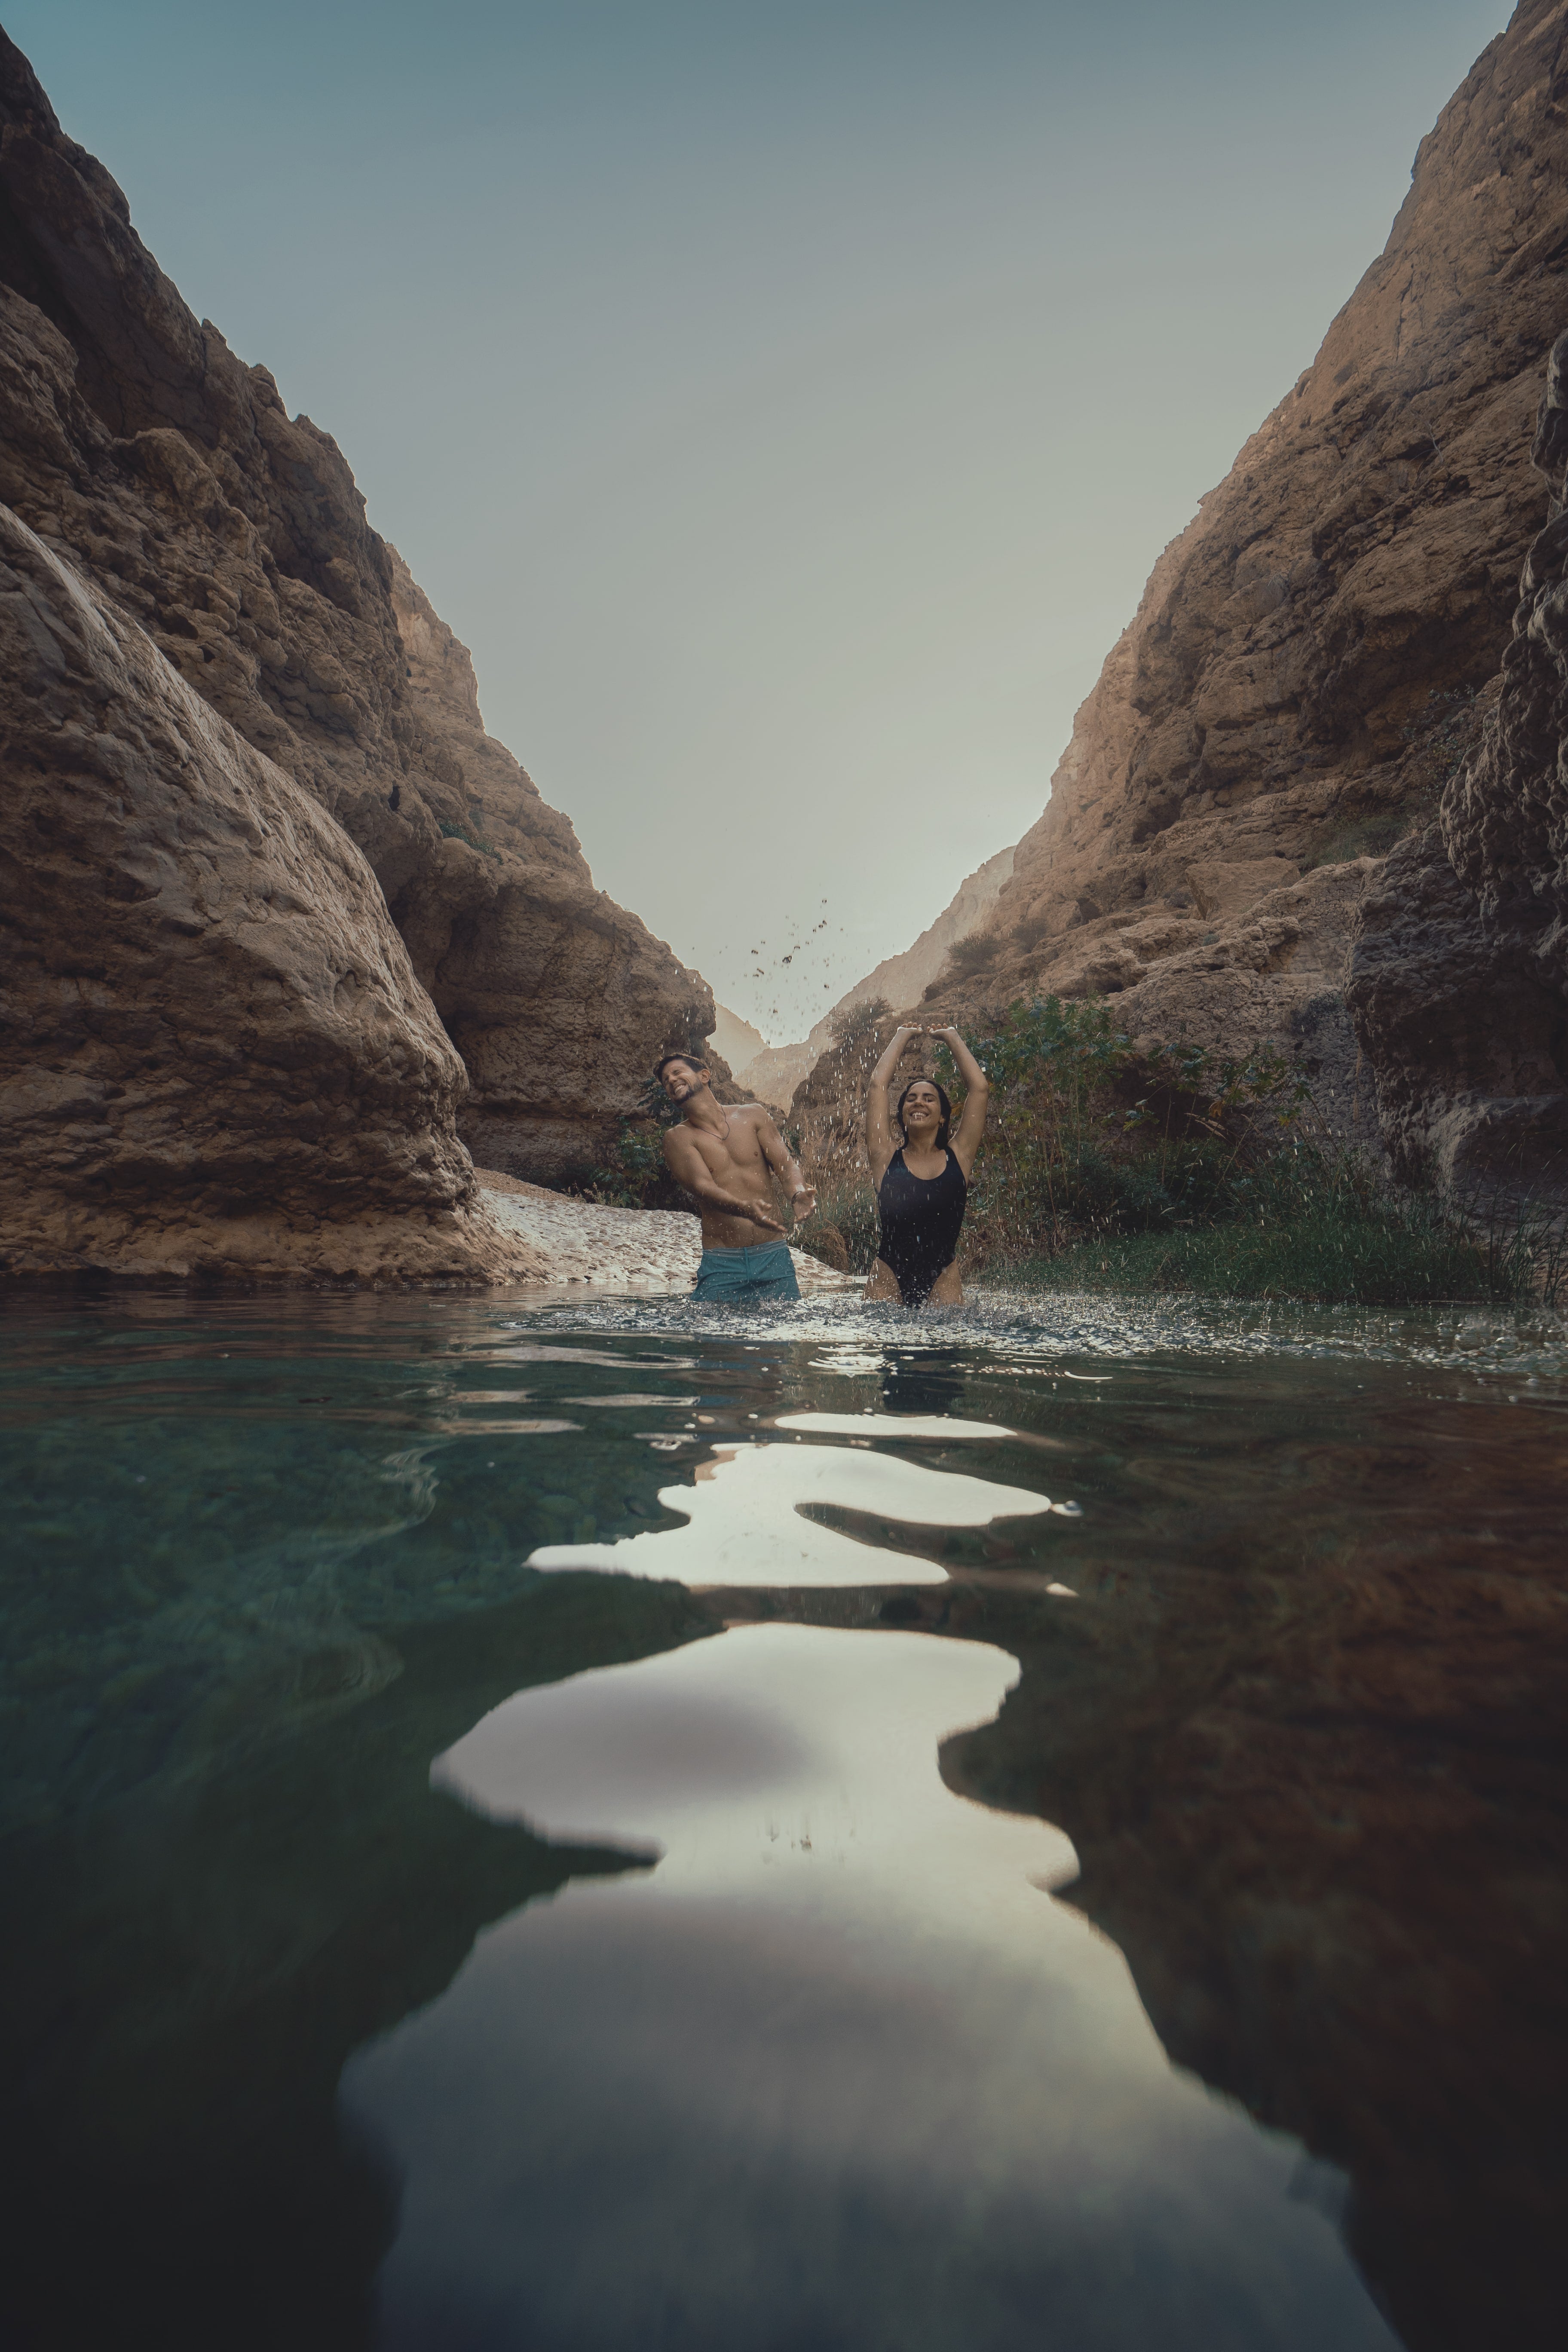 Lost LeBlanc and WhatTheChic in Wadi Shab, Oman